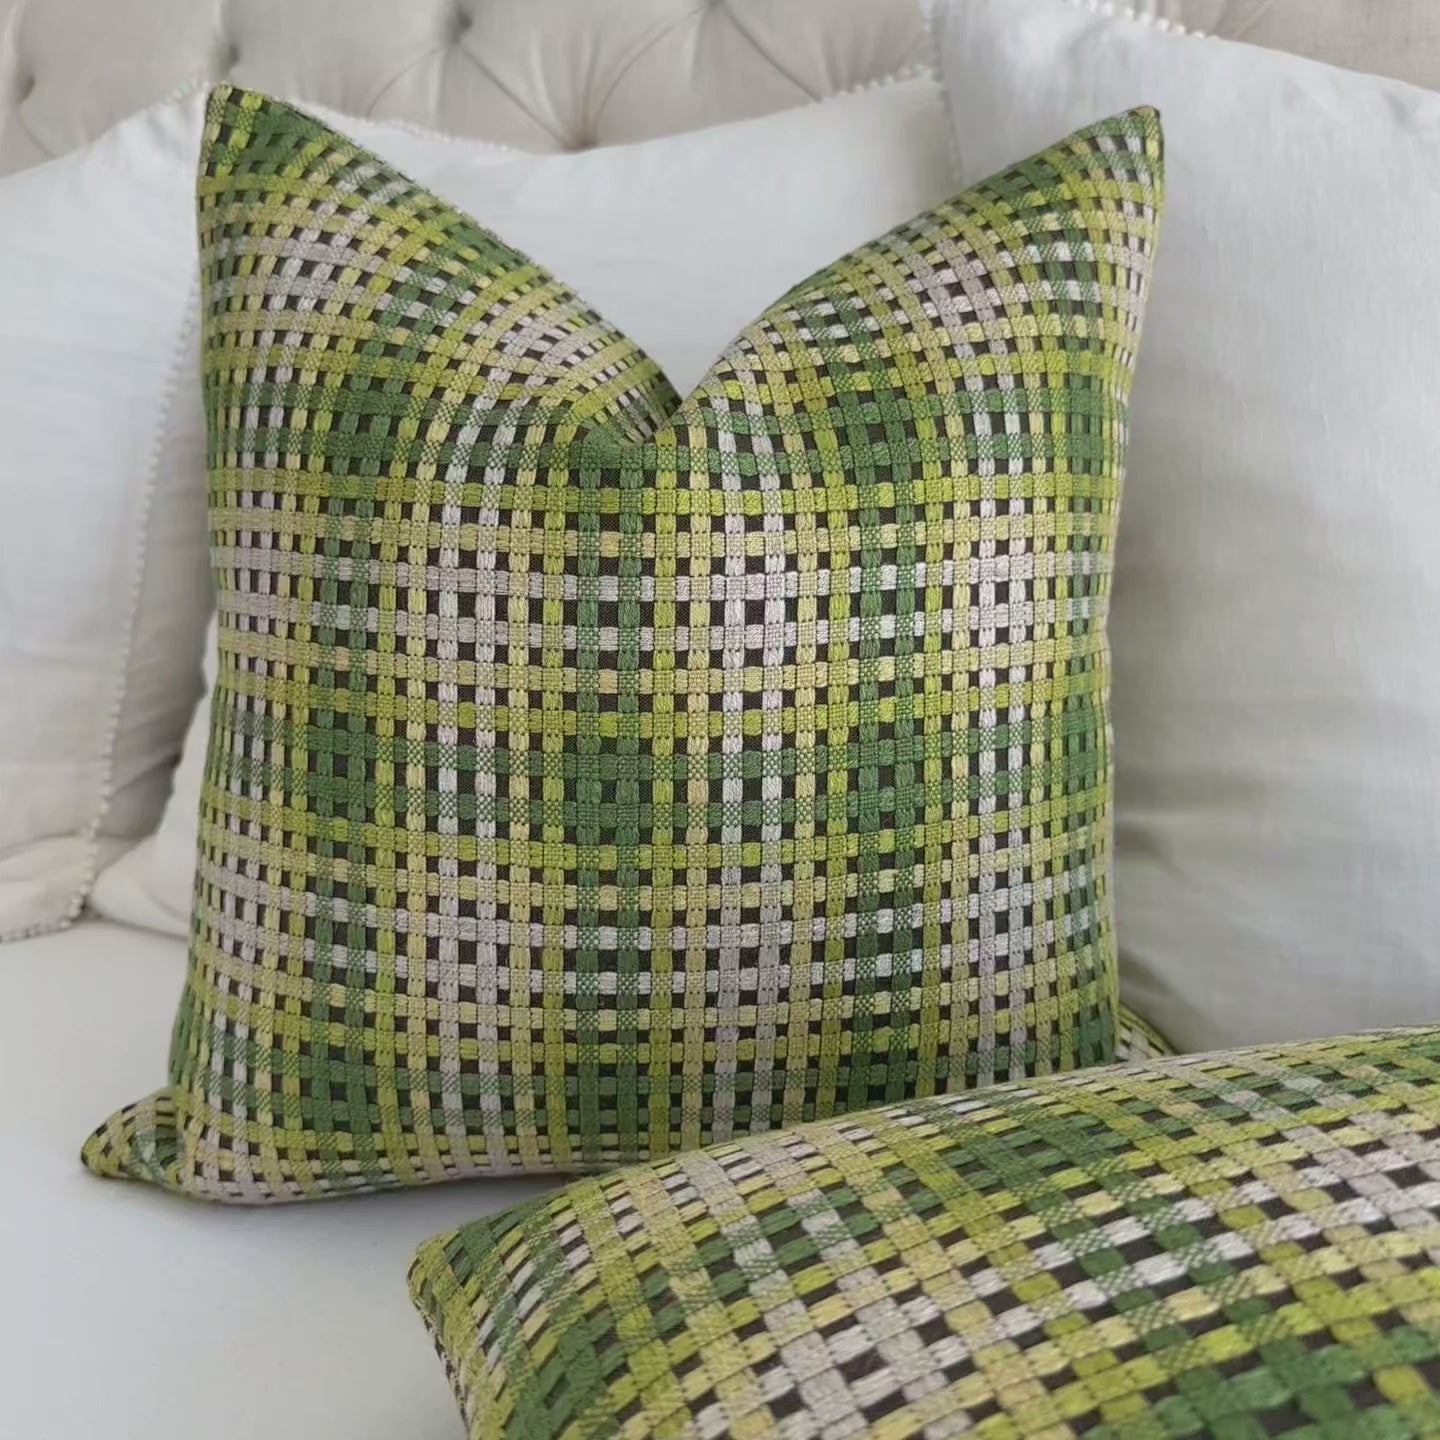 Scalamandre Twiggy Deep Forest Green and Yellow Checkered Striped Woven Gradient Designer Luxury Throw Pillow Cover Product Video